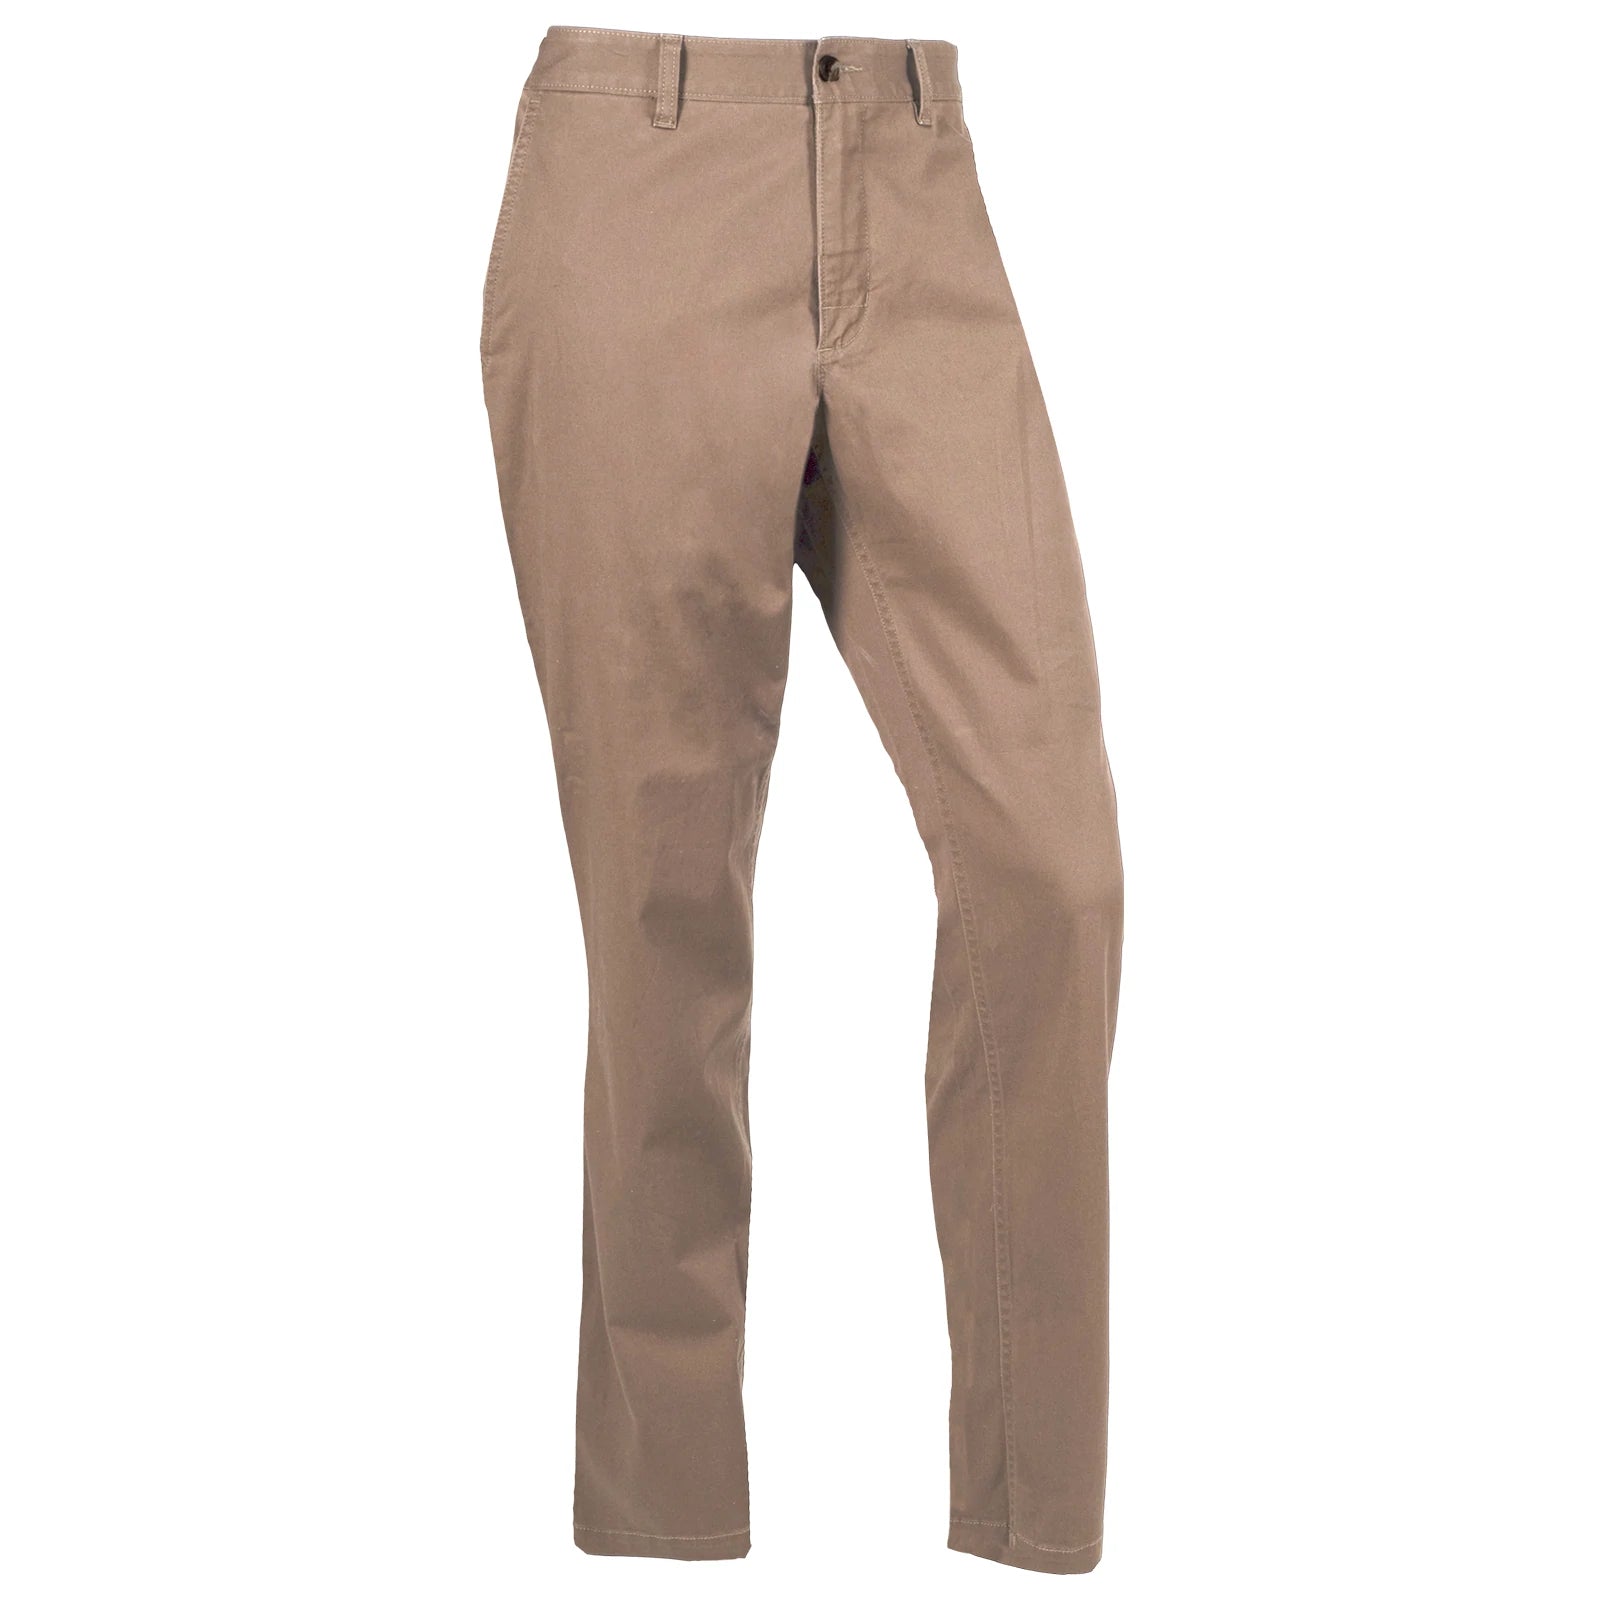 Homestead Chino Modern Fit Pant